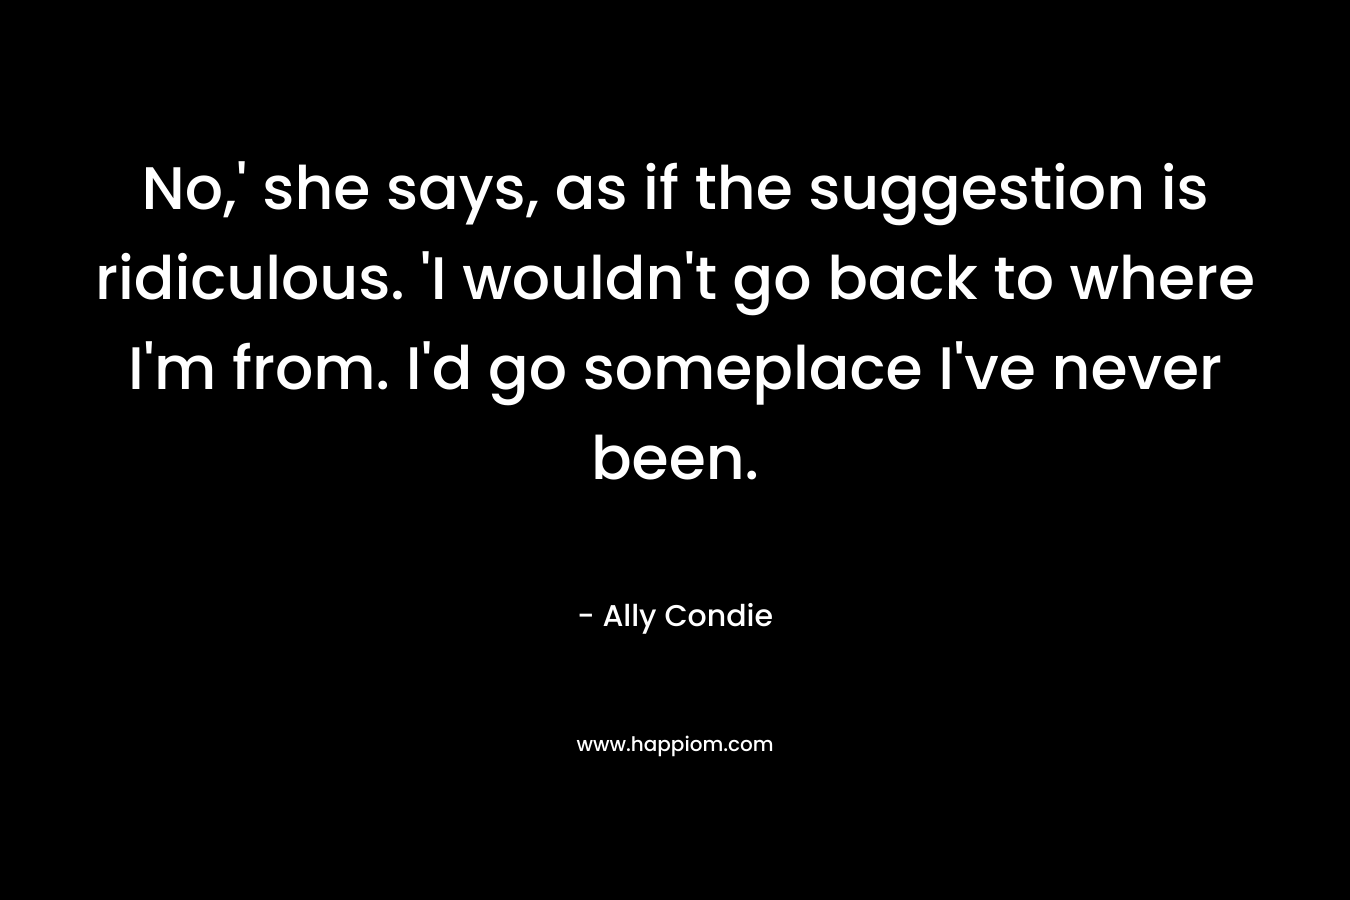 No,’ she says, as if the suggestion is ridiculous. ‘I wouldn’t go back to where I’m from. I’d go someplace I’ve never been. – Ally Condie